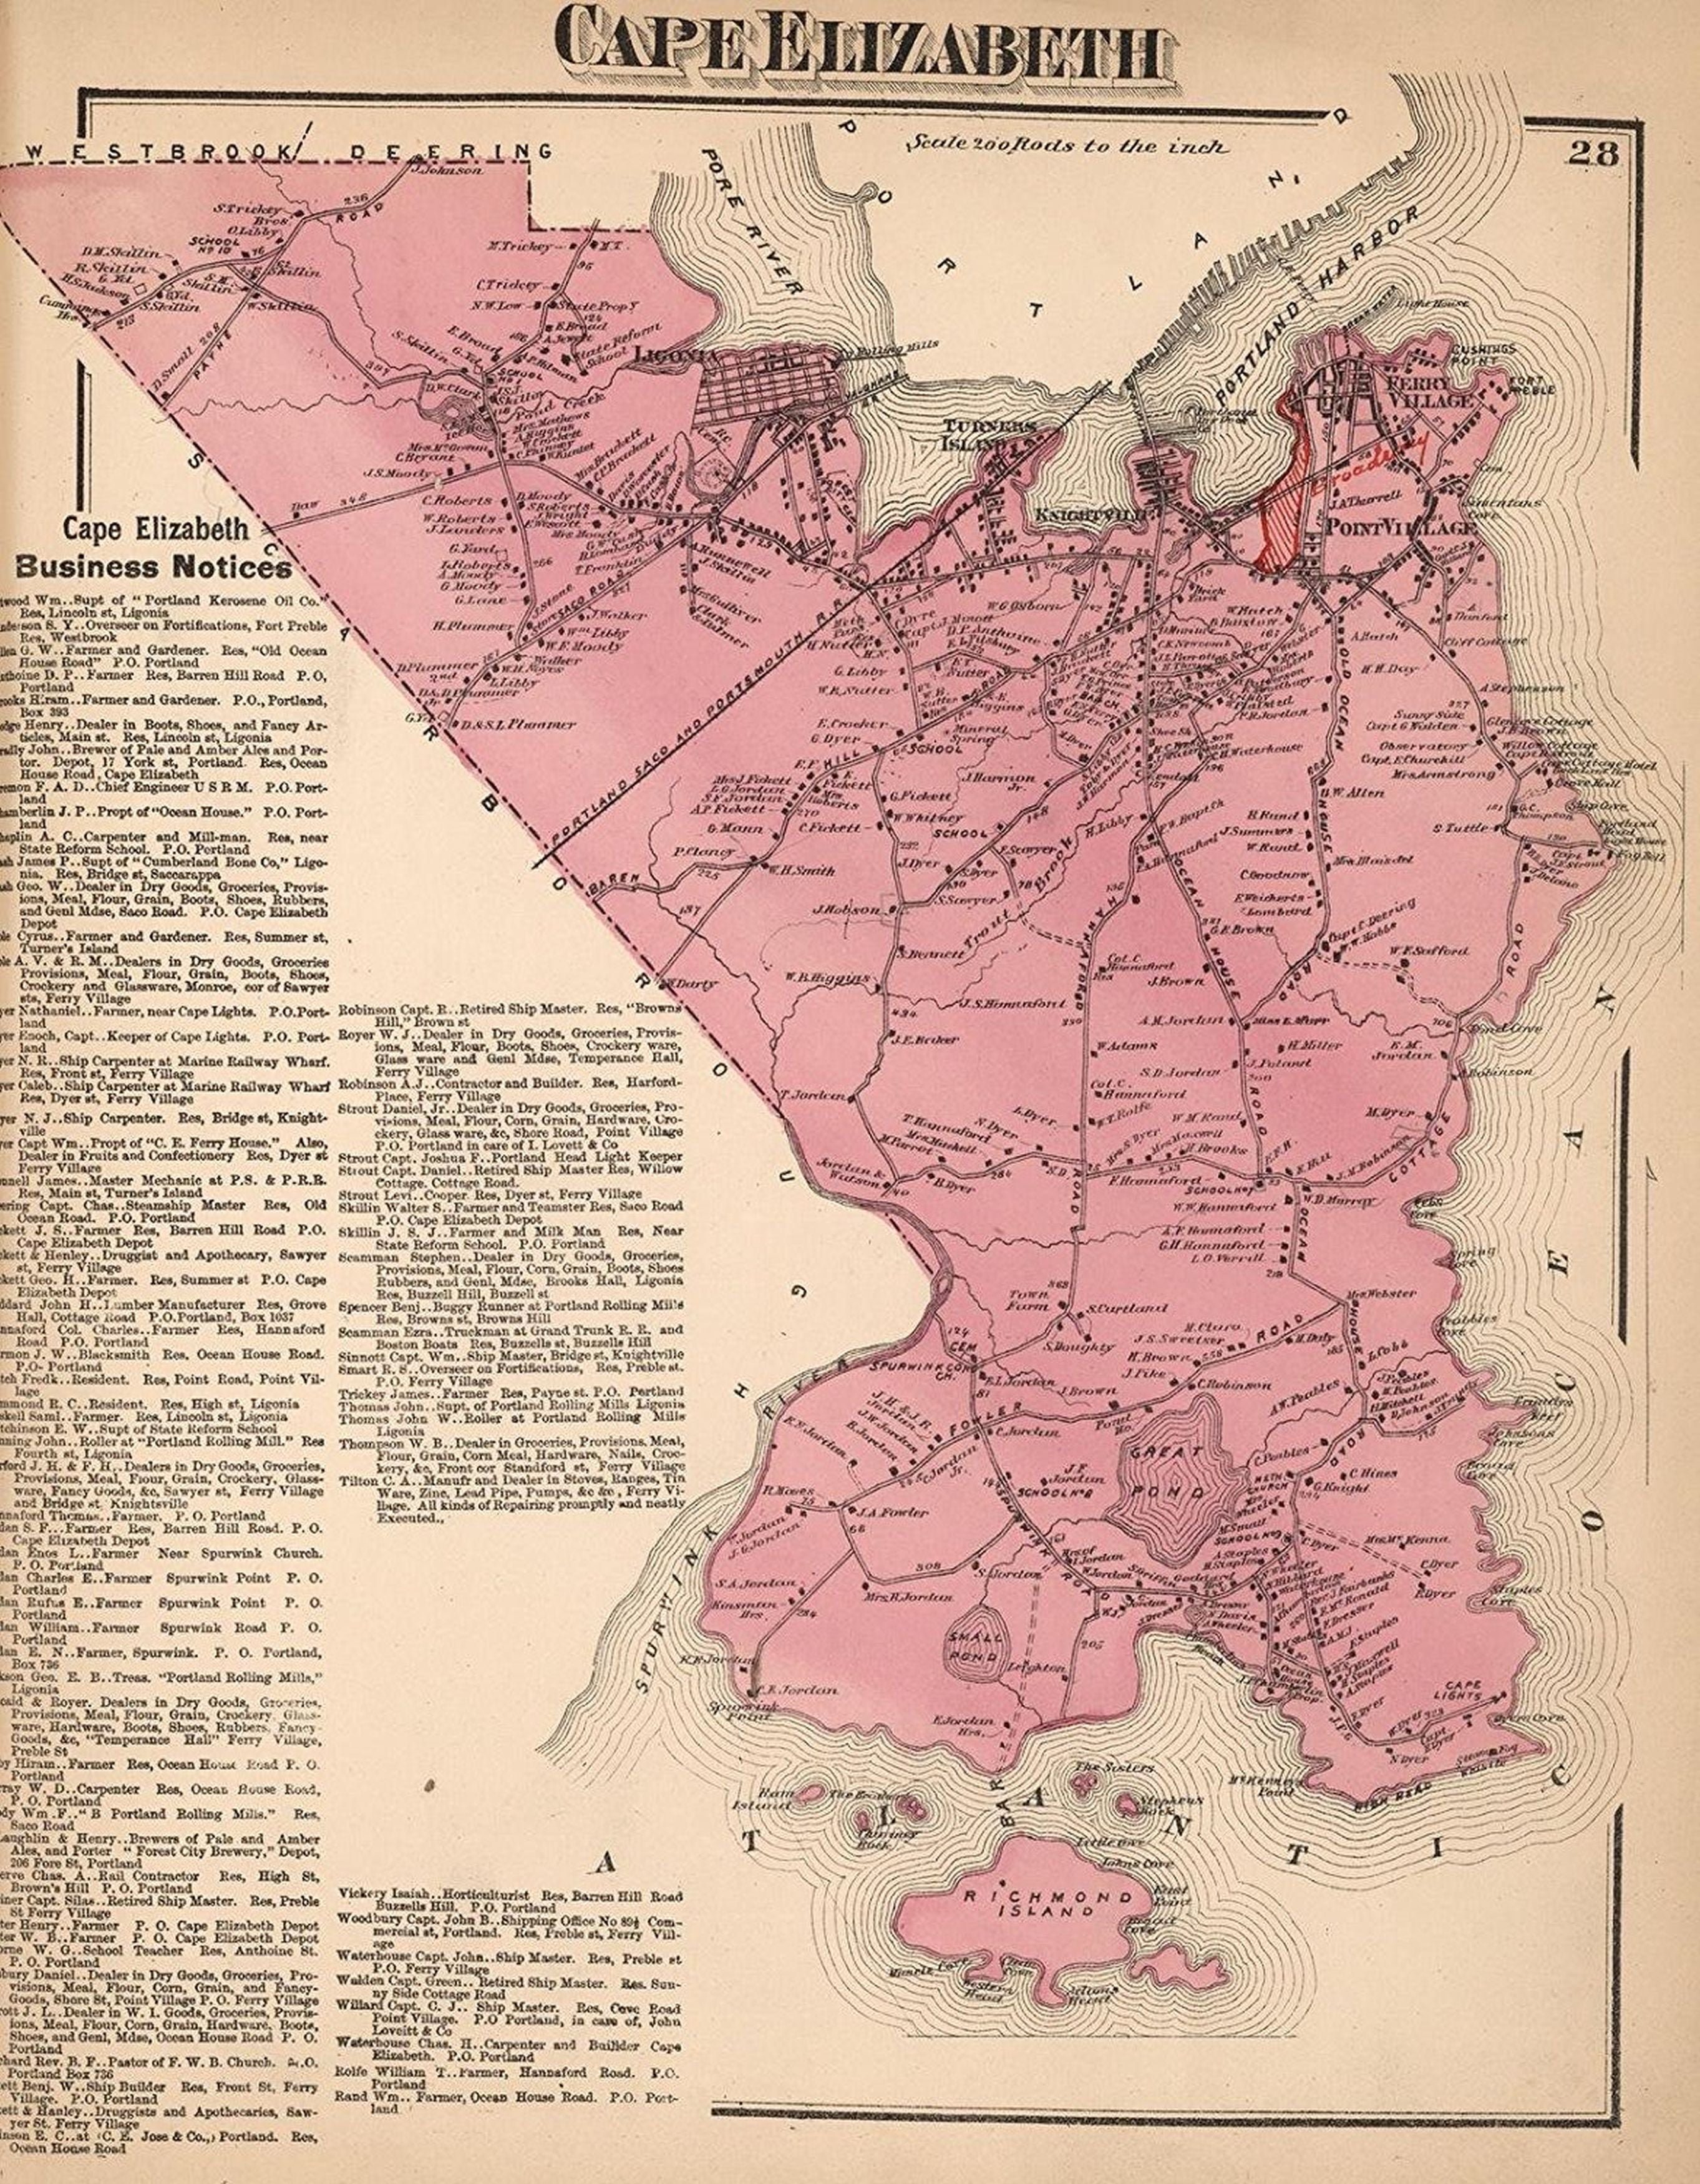 Cape Elizabeth., Atlas Of Cumberland County, Maine. From actual Surveys by and under the Direction of F.W. Beers. Assisted by Geo. P. Sanford and Others, Published by F.W. Beers and Co. 93 and 95 Maiden Lane, New York. 1871. Entered... 1871 by F.W. Beers